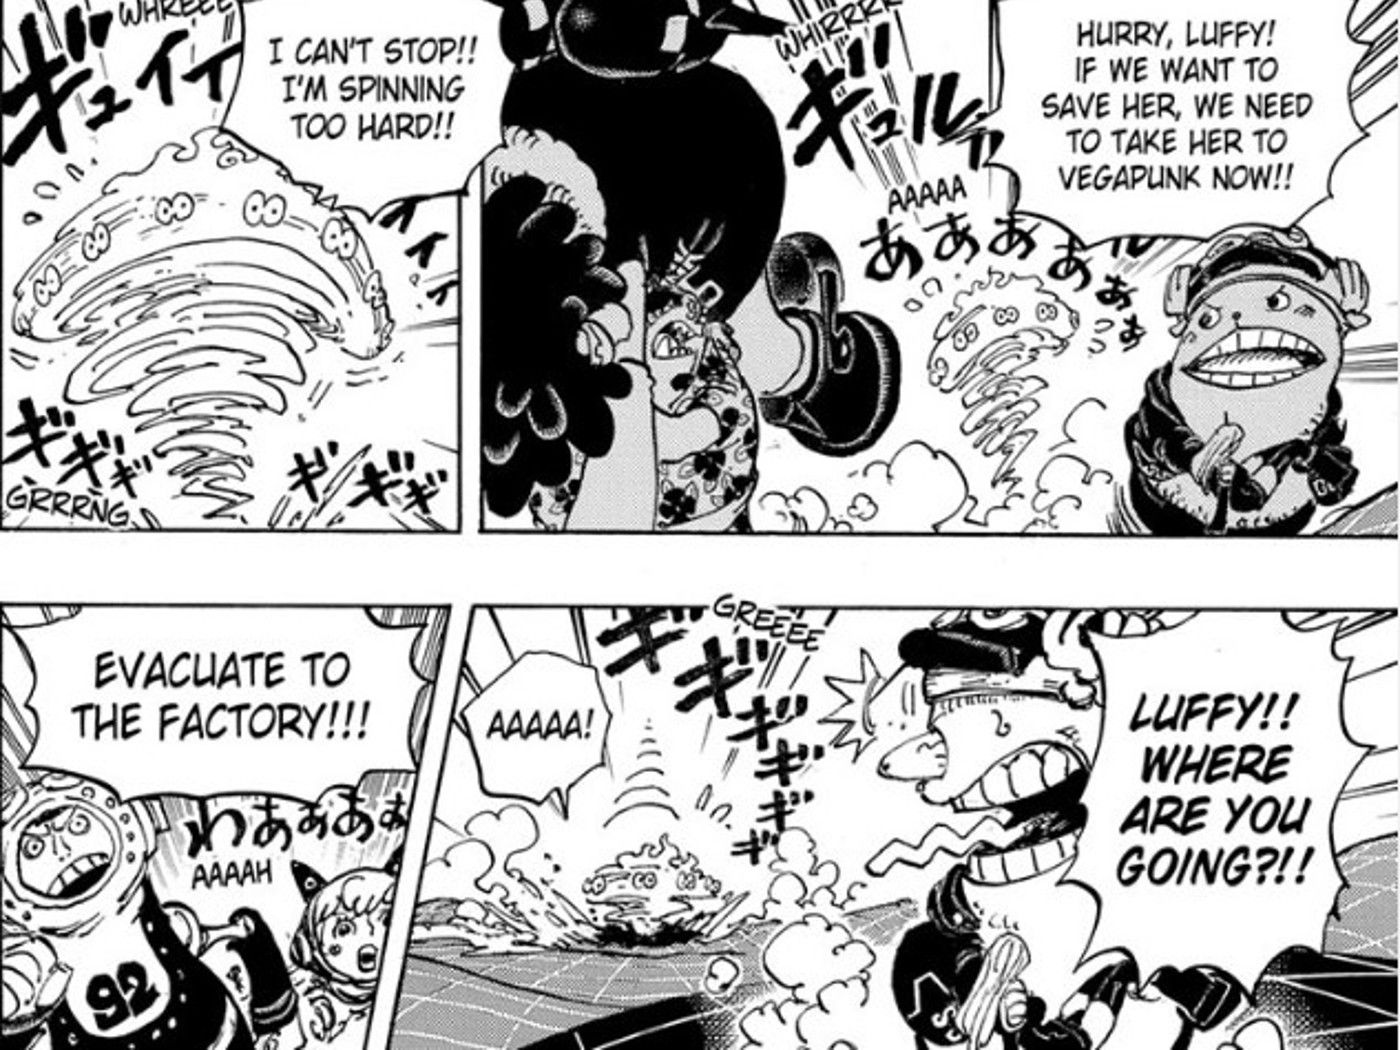 Luffy spins out of control in One Piece